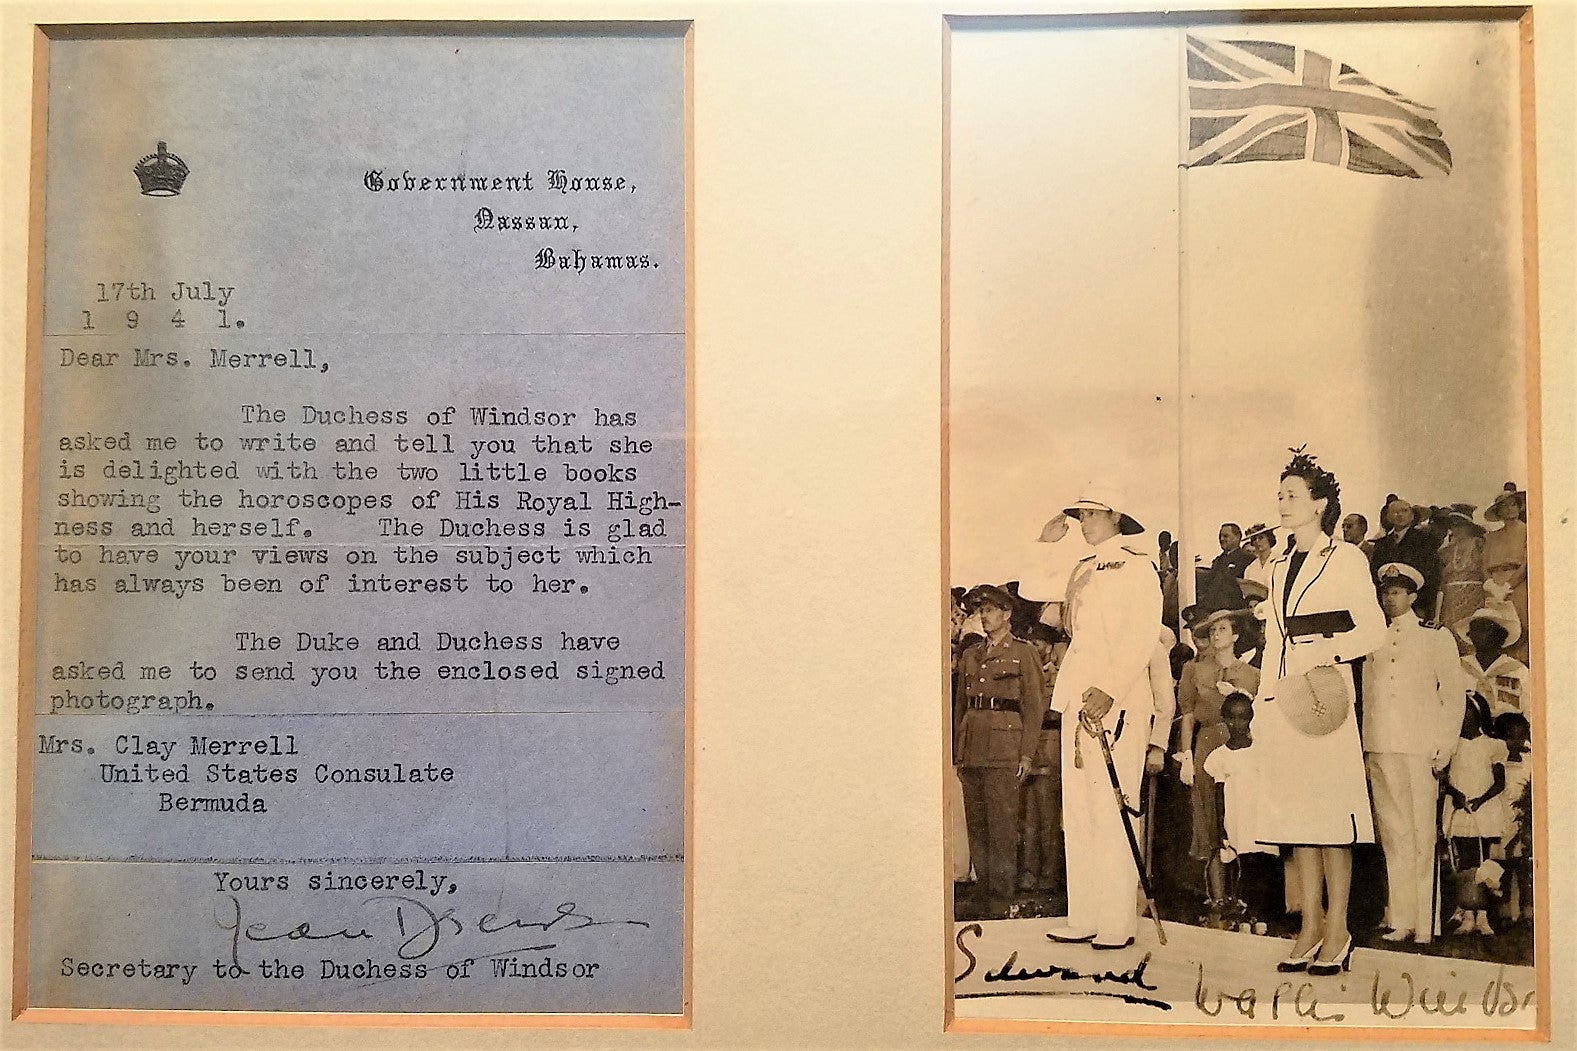 DUKE AND DUCHESS OF WINDSOR ORIGINAL PHOTO AND ASSOCATION LETTER